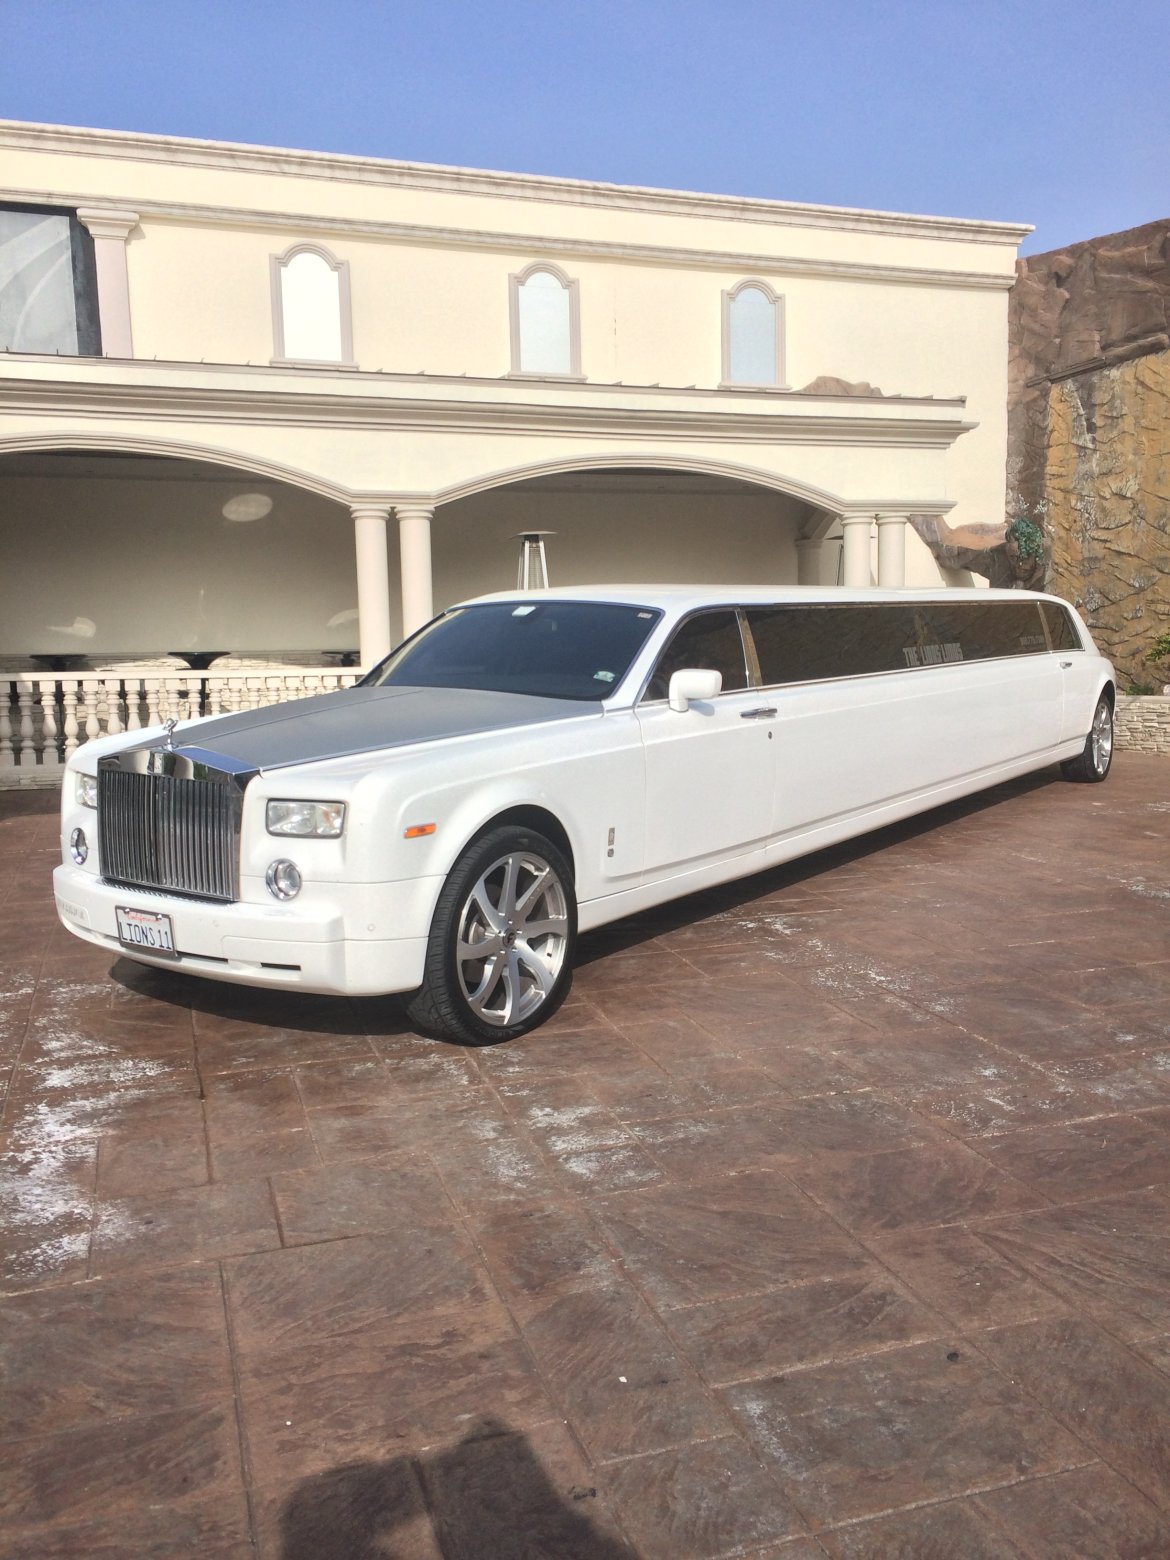 Limousine for sale: 2004 Rolls-Royce Phantom by LIMOS BY MOONLIGHT